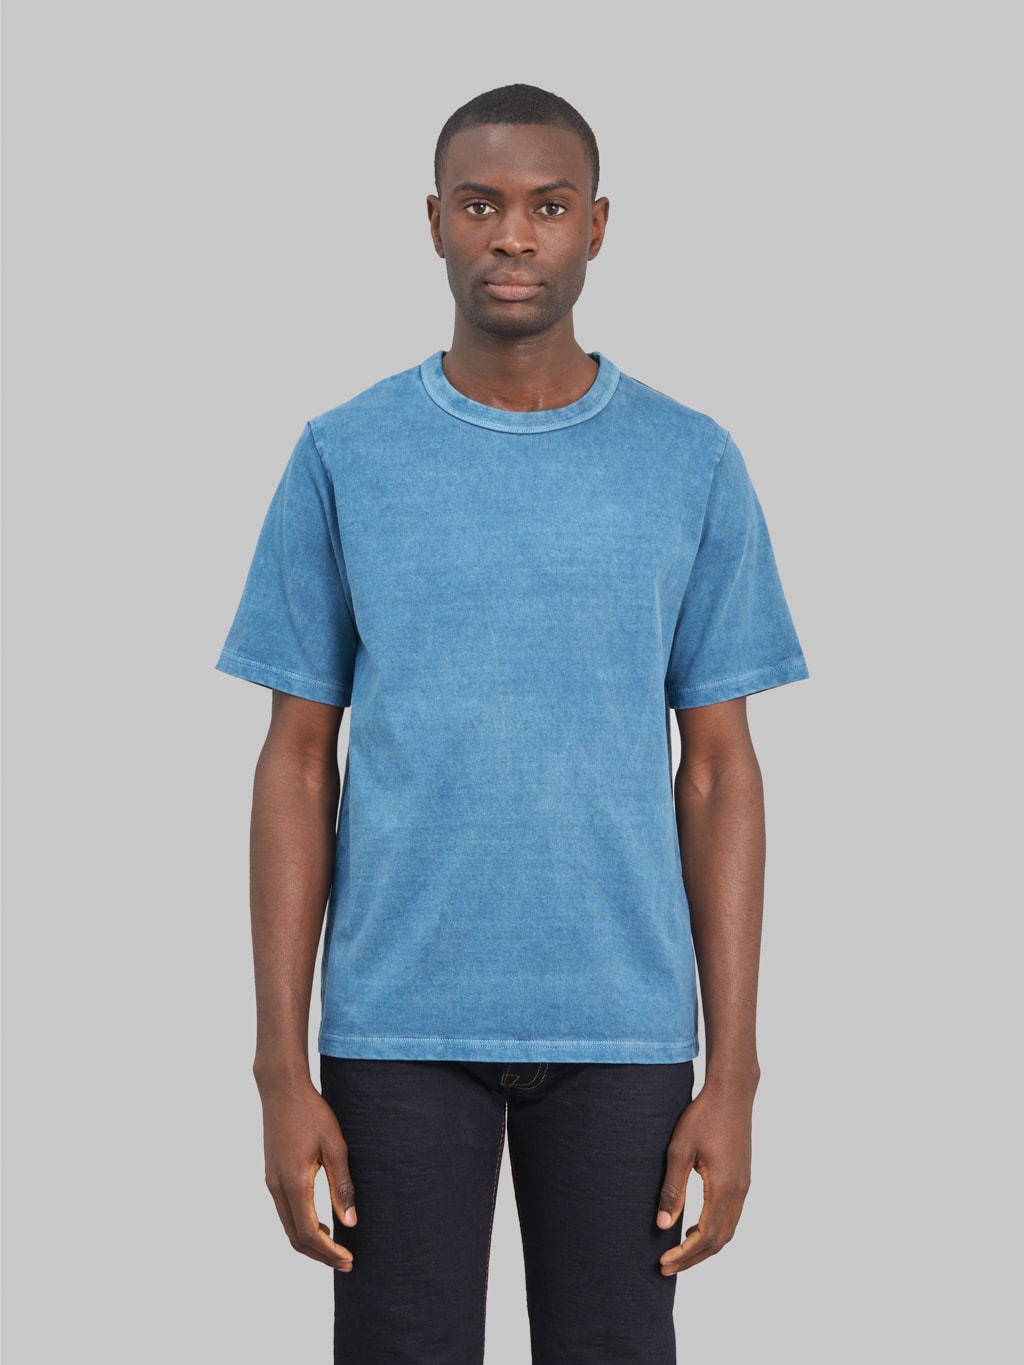 jackman lead off tshirt fade blue model front fit